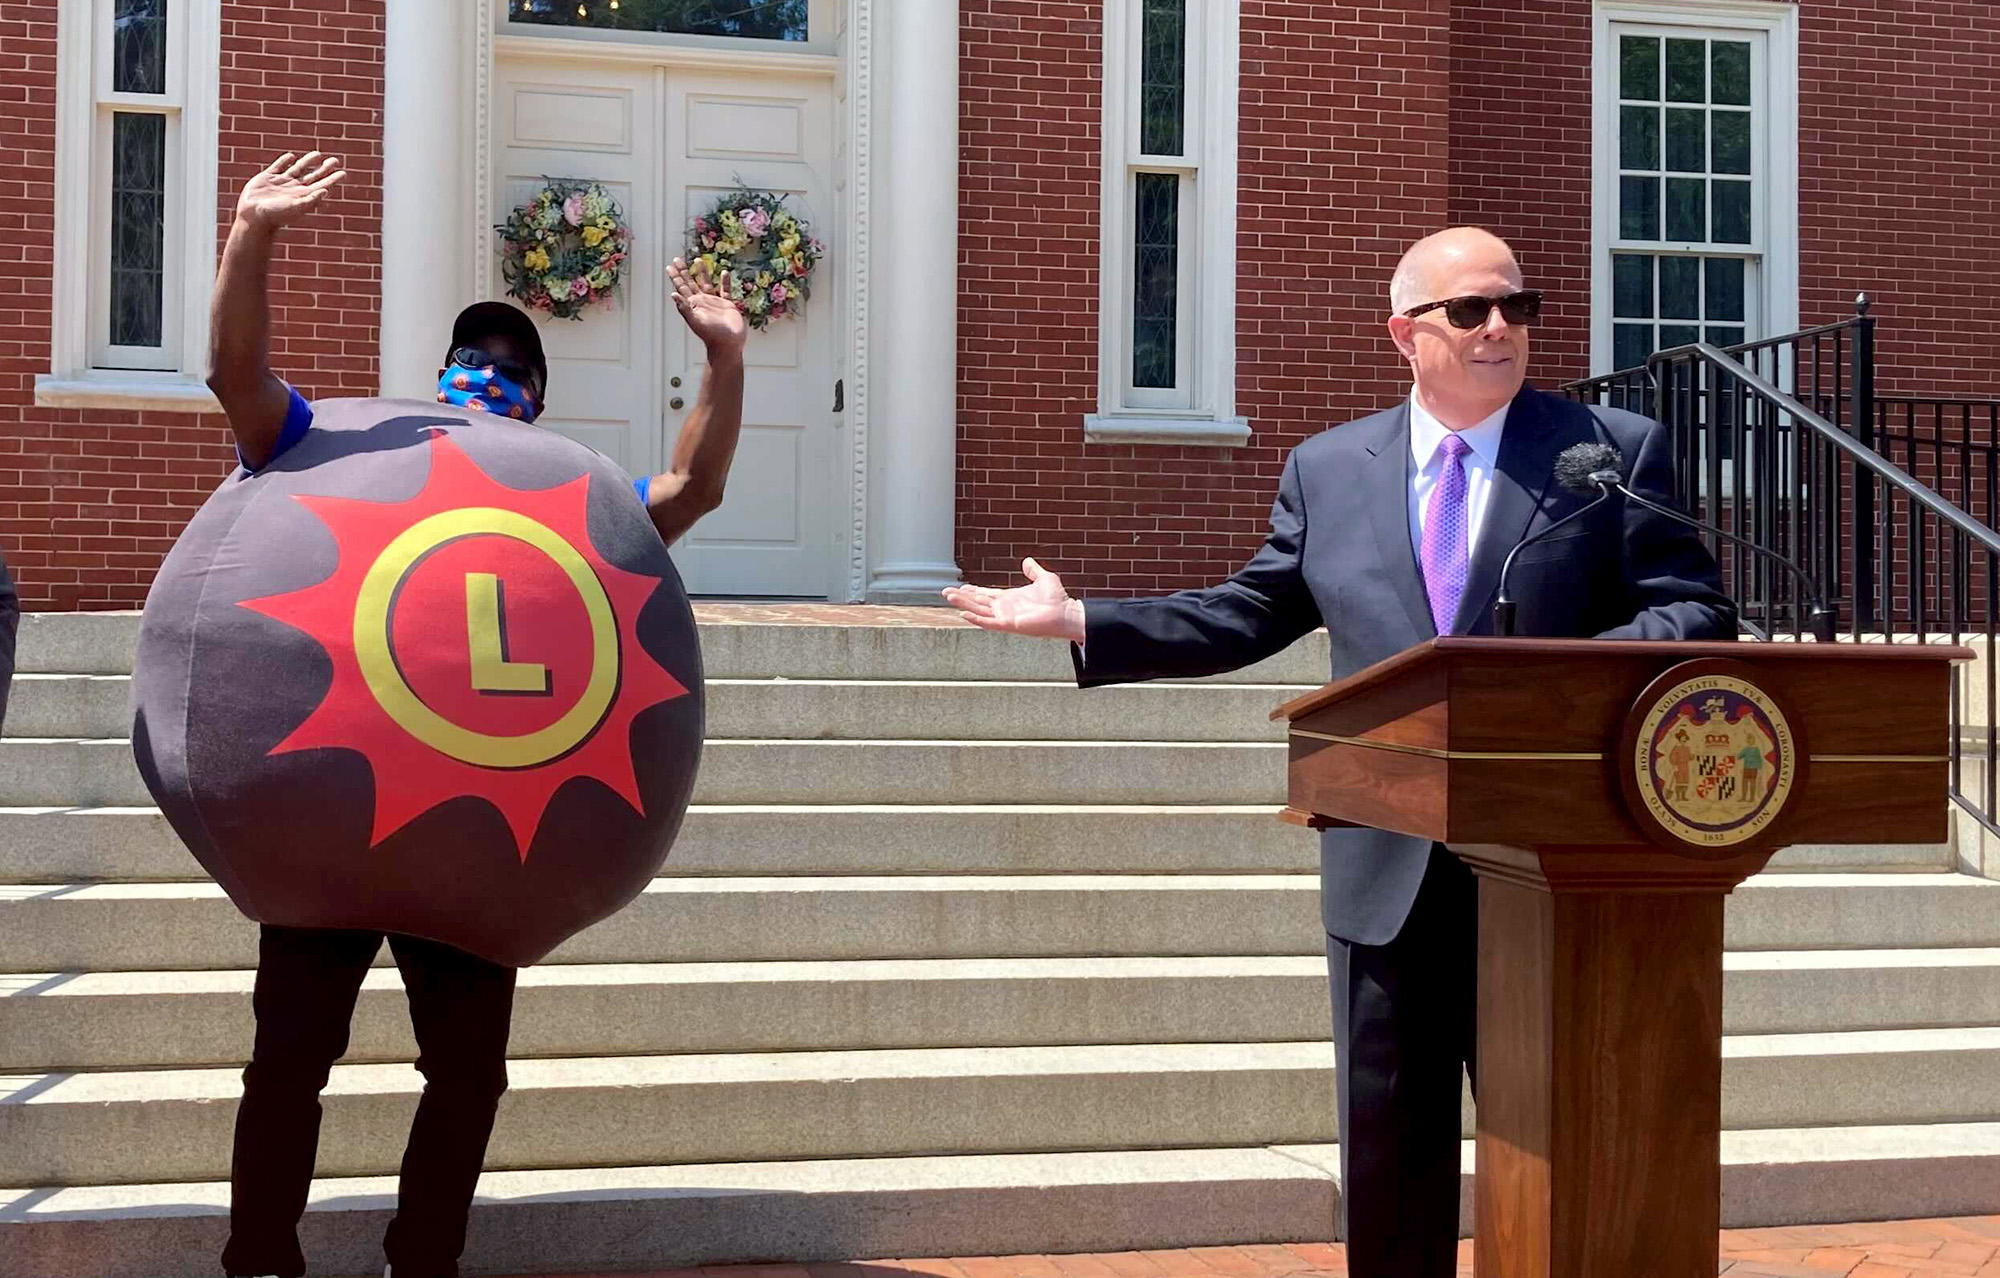 PHOTO: Gov. Larry Hogan announced that the Maryland Lottery will be awarding $2 million in prize money to Marylanders who have been vaccinated against COVID-19 during a press conference, May 20, 2021.